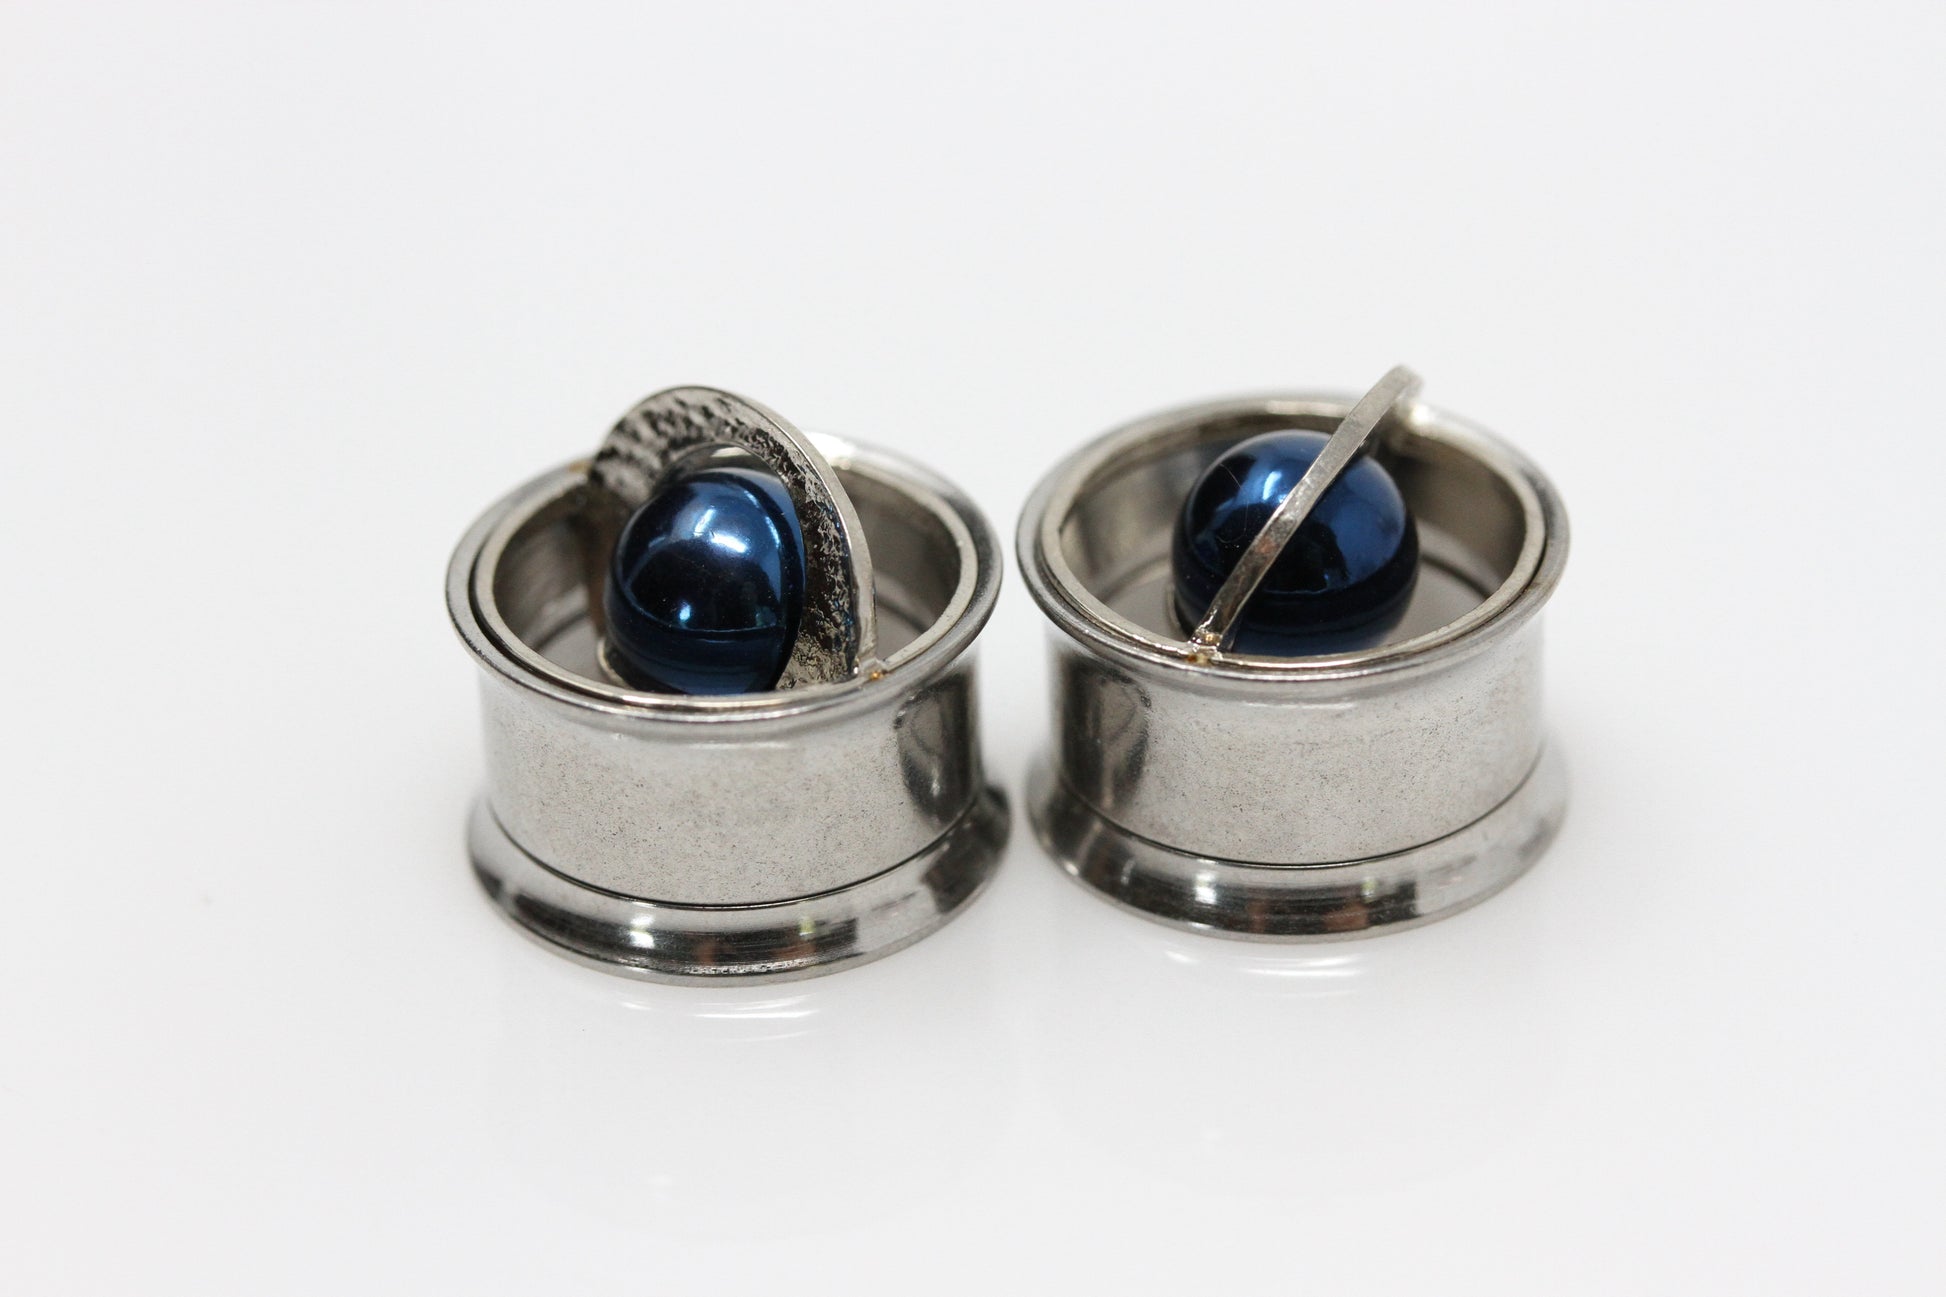 Stainless steel tunnels for stretched ears